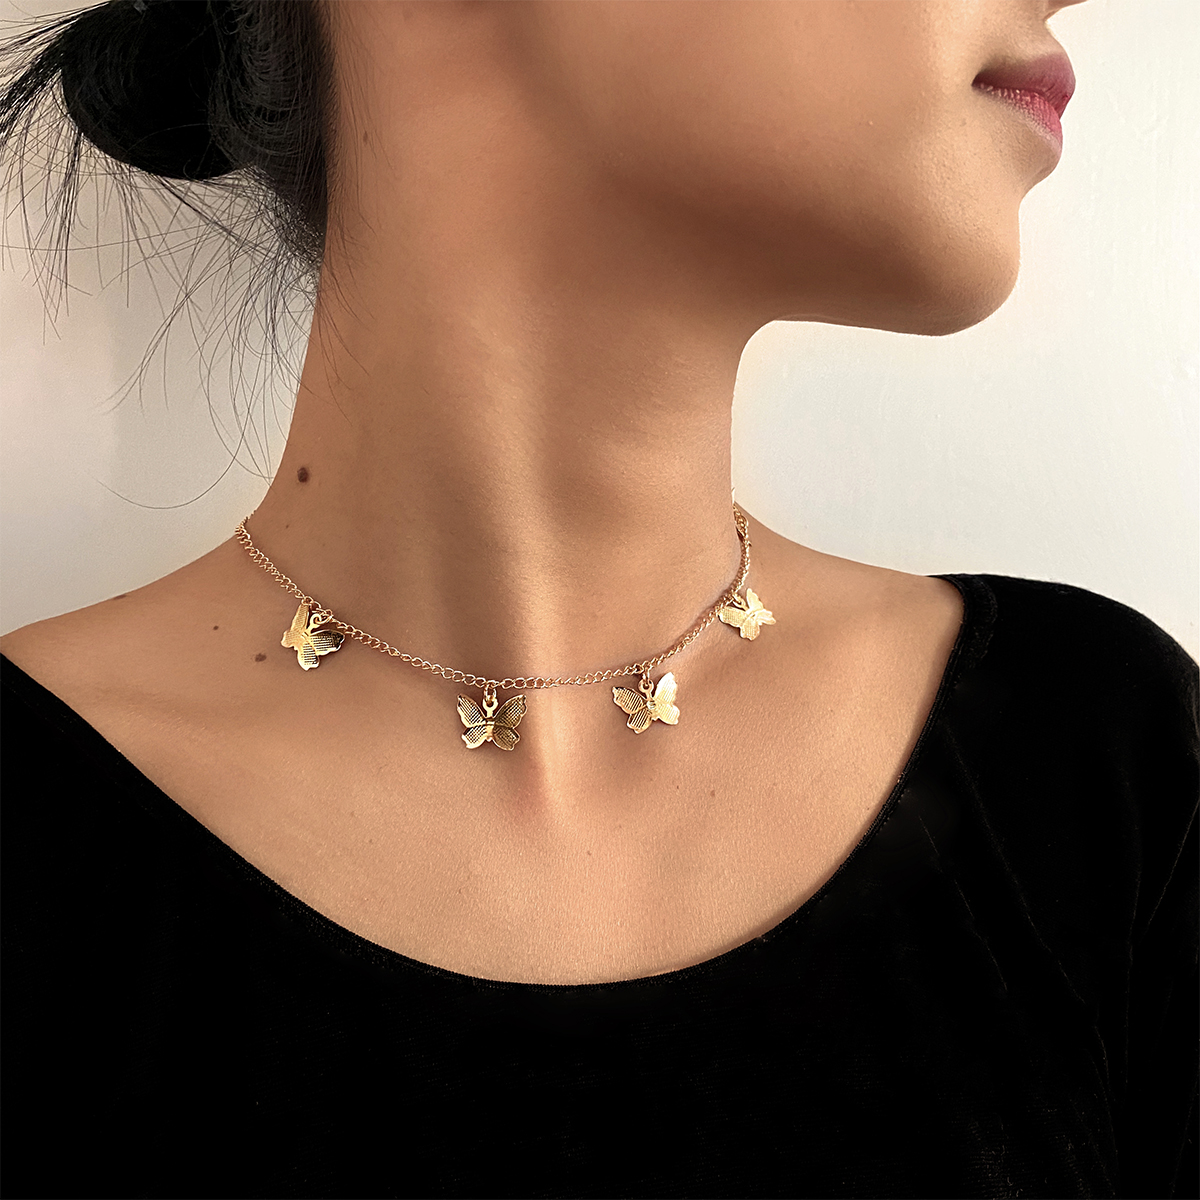 FREE SHIPPING Butterfly Pendant Choker Necklace Gold Chain Jewelry JKP4654